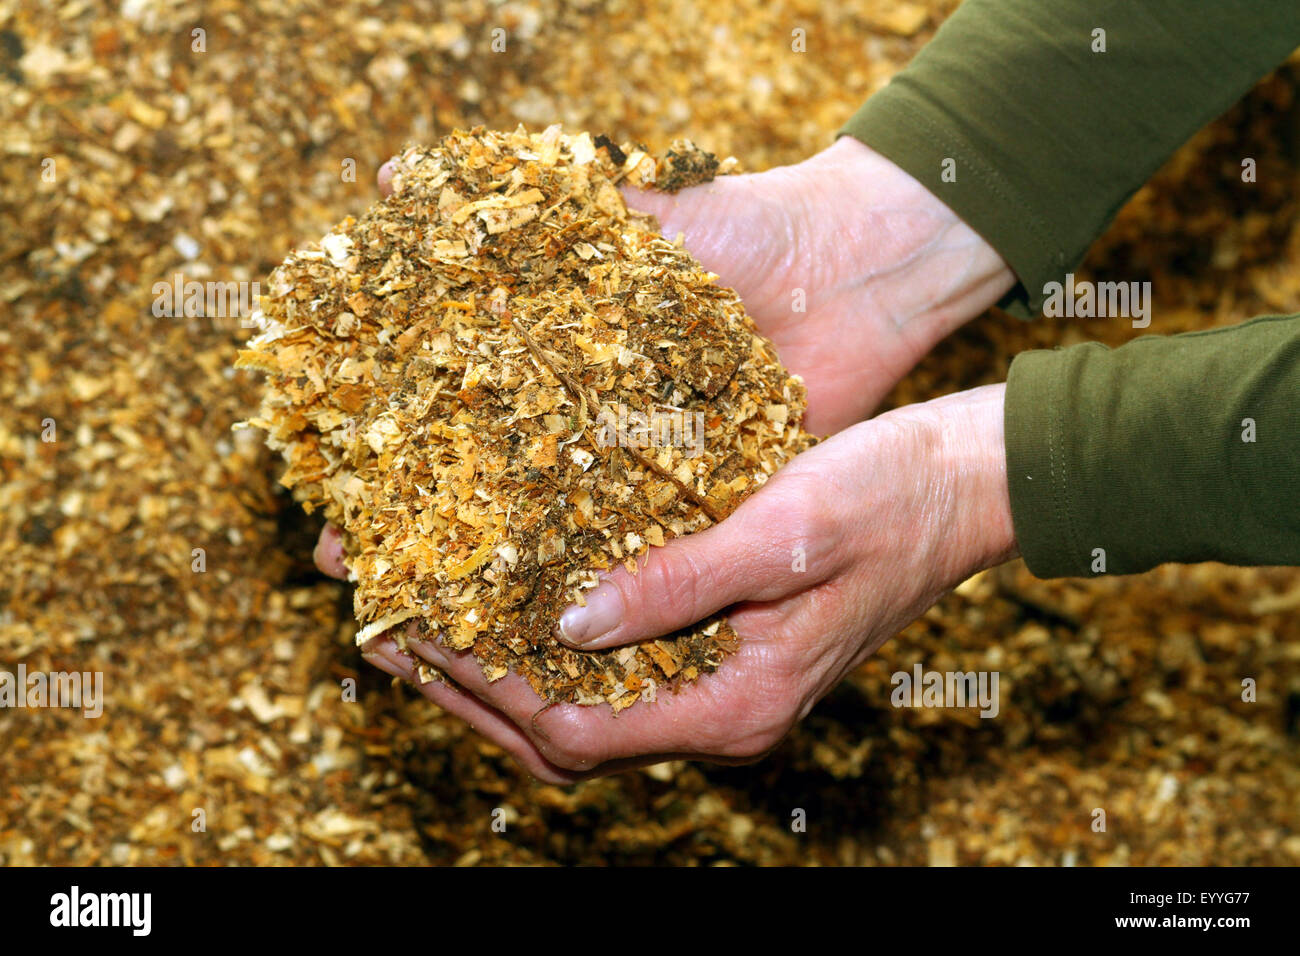 wood shavings for the garden in the hands of a woman, Germany Stock Photo